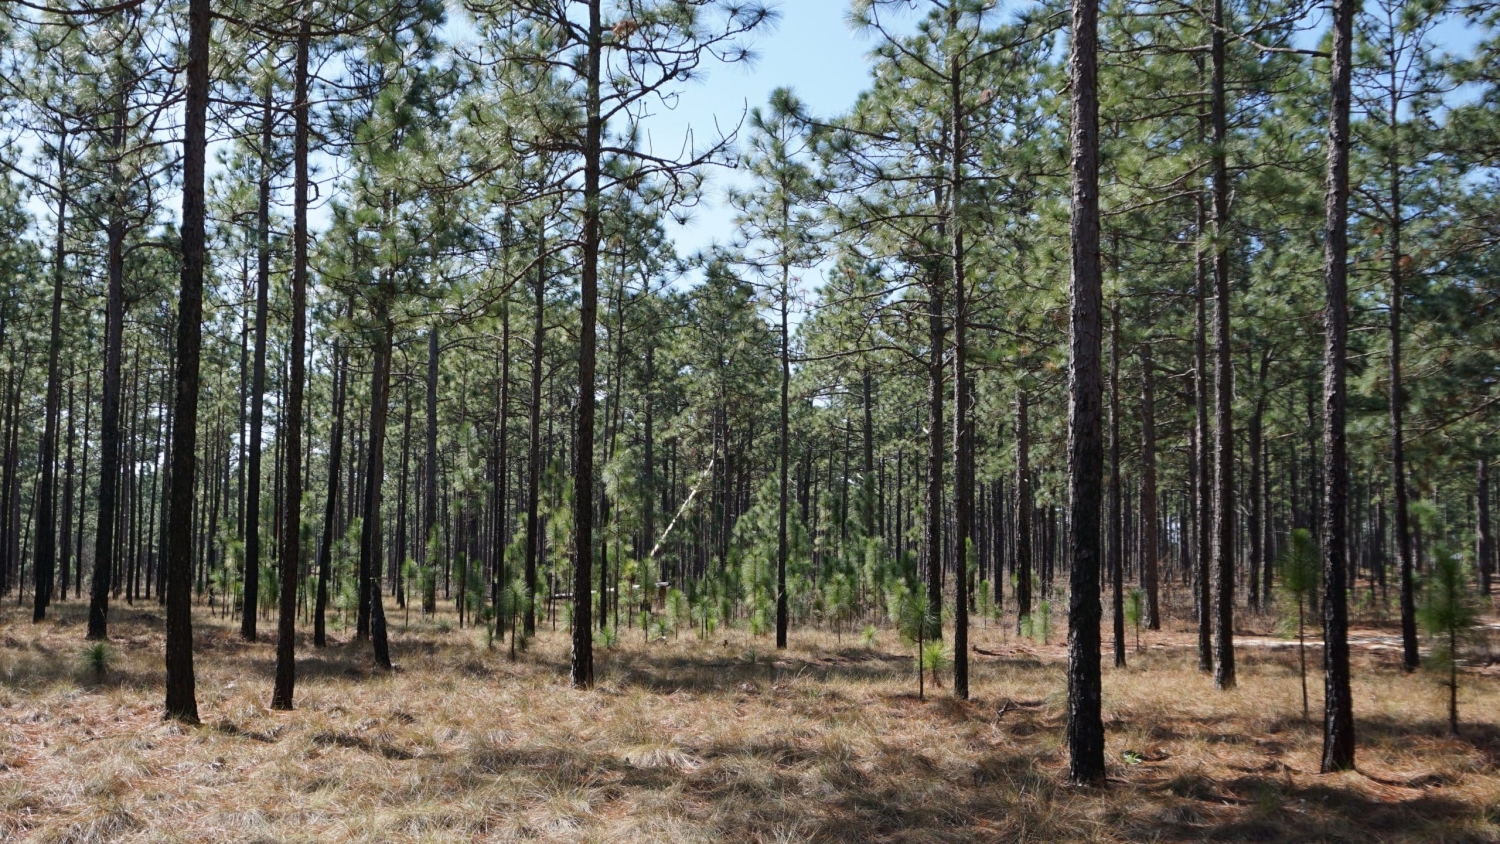 North Carolina forest - The Way Land Is Protected in N.C. Will Impact Wildlife Habitat Connectivity Study Shows - College of Natural Resources News NC State University